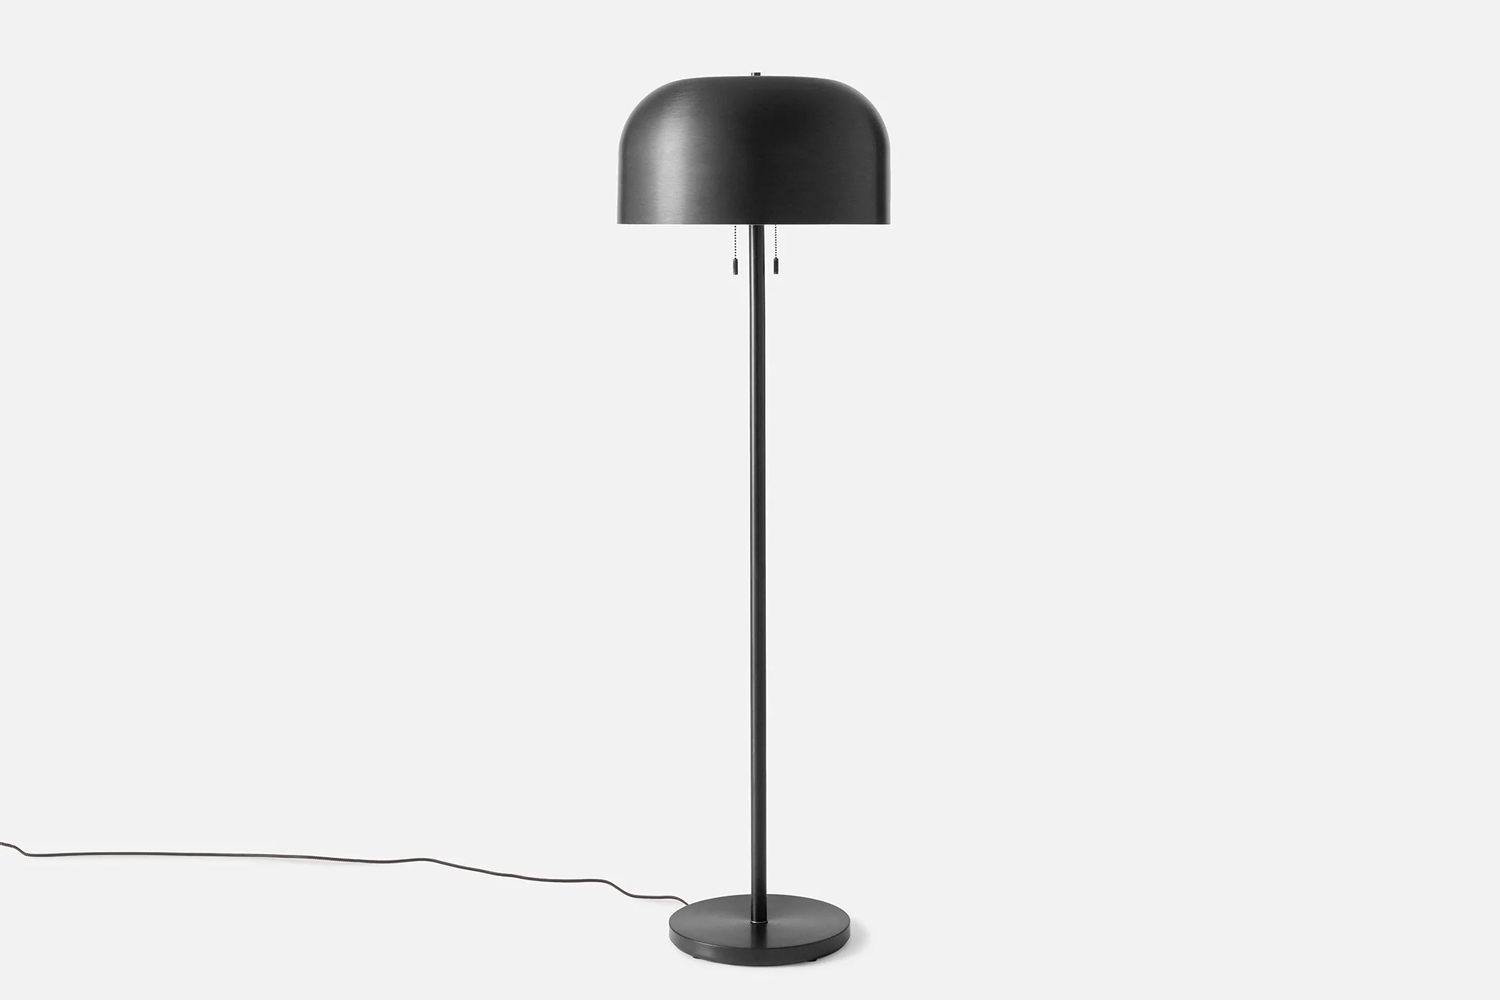 for a similar look the schoolhouse donna floor lamp in black anodized is \$\1,0 16